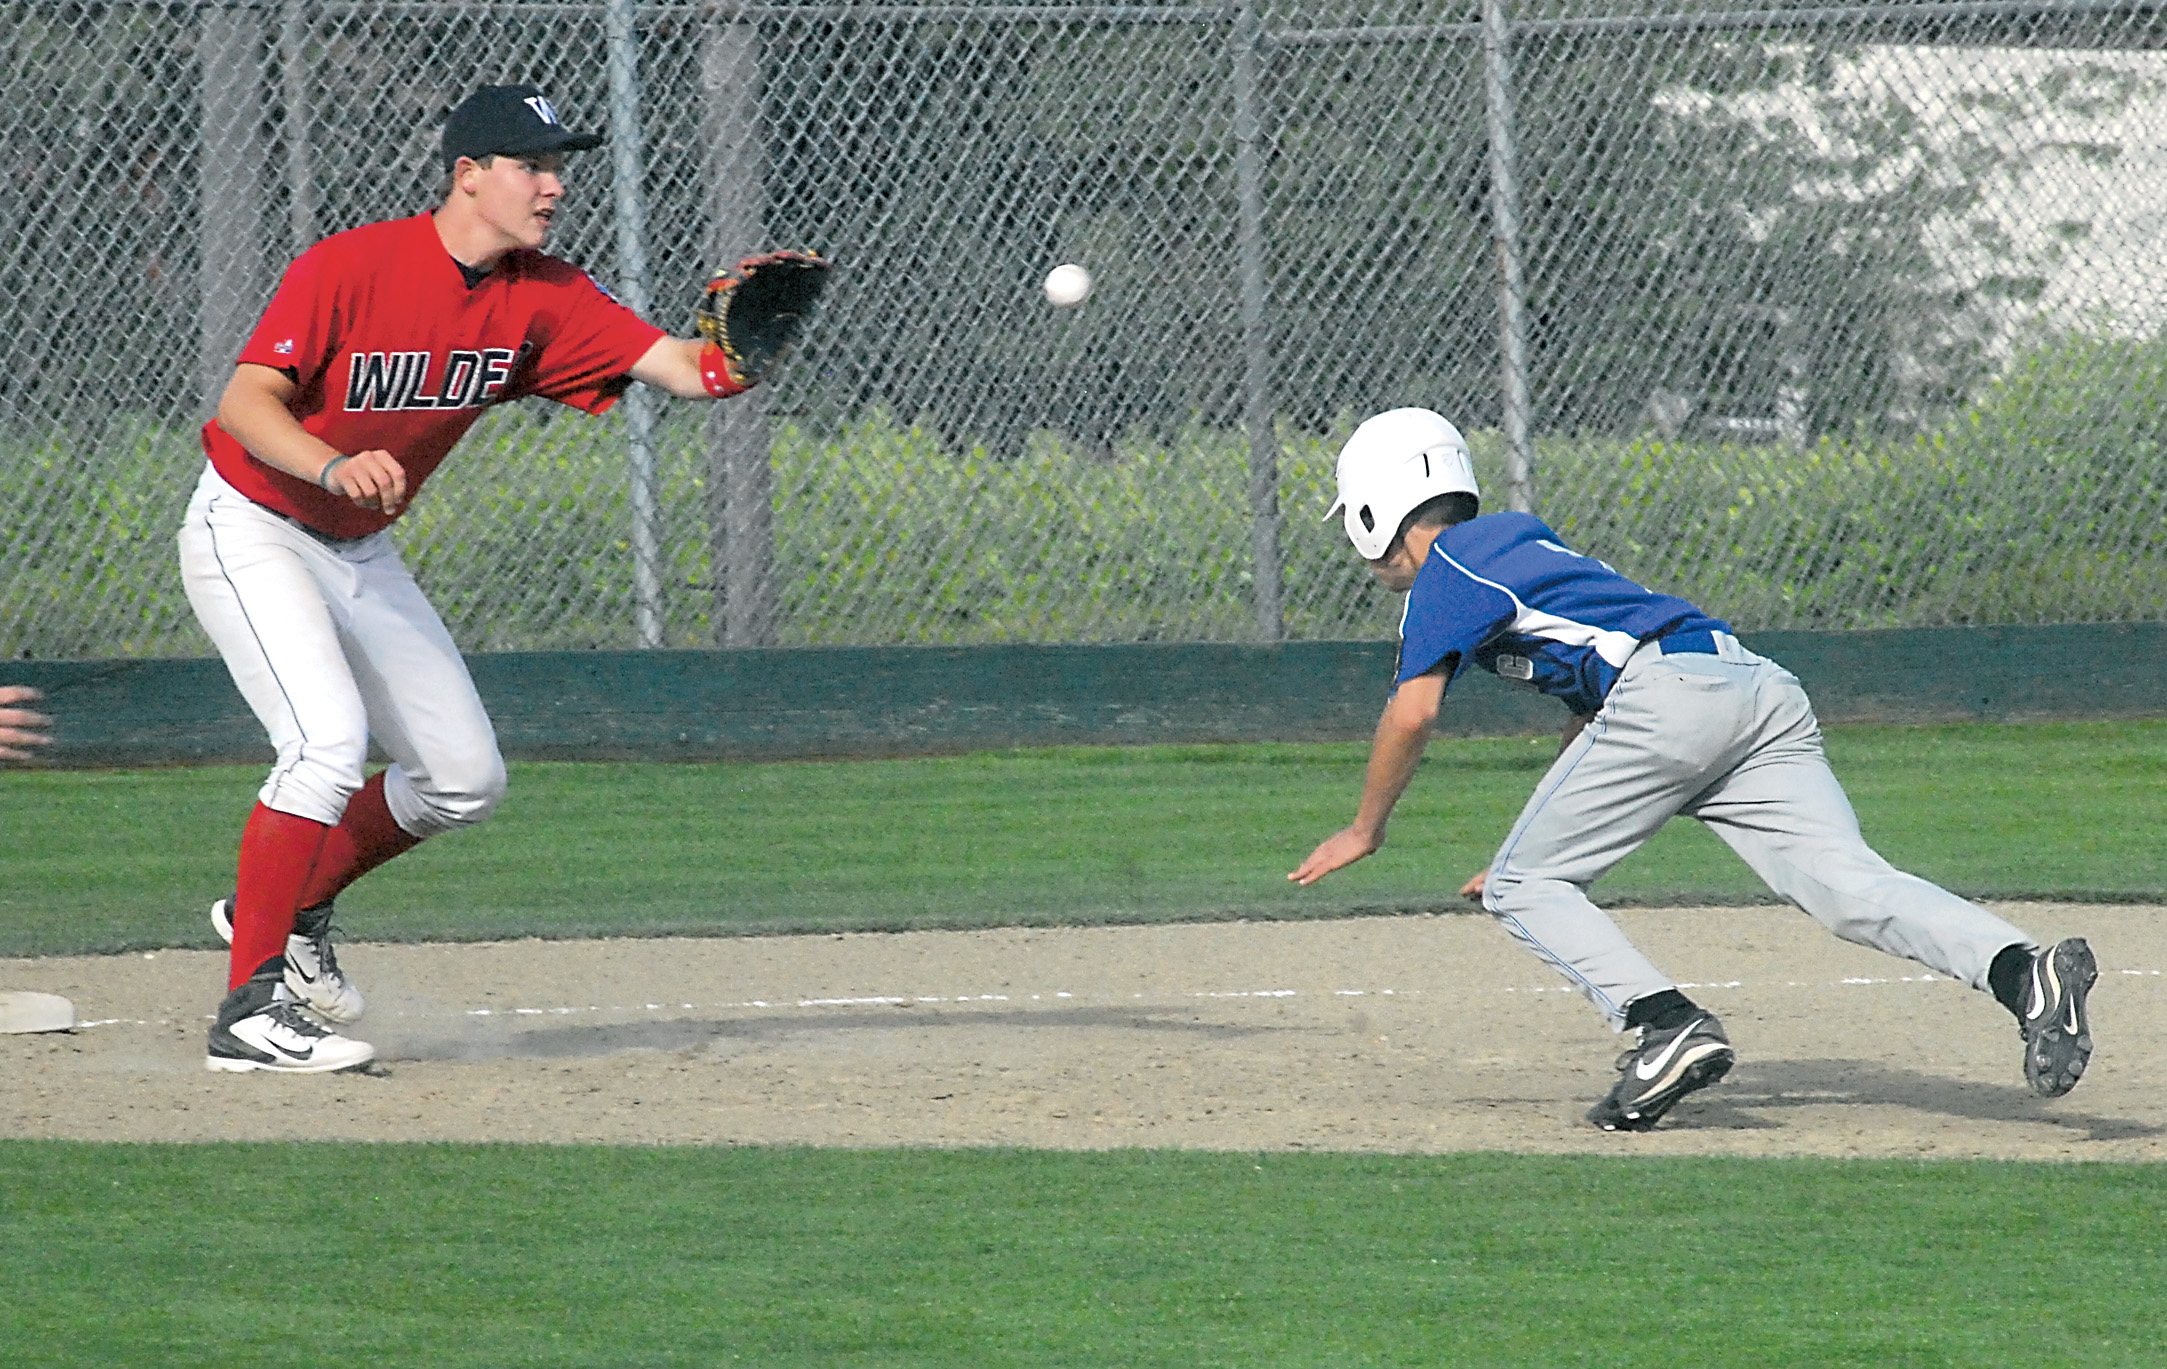 Wilder shortstop Dan Harker tries to cut off Olympic's Eric Turnquist at third base in the second inning of Wilder's 17-11 at Civic Field in Port Angeles. Keith Thorpe/Peninsula Daily News